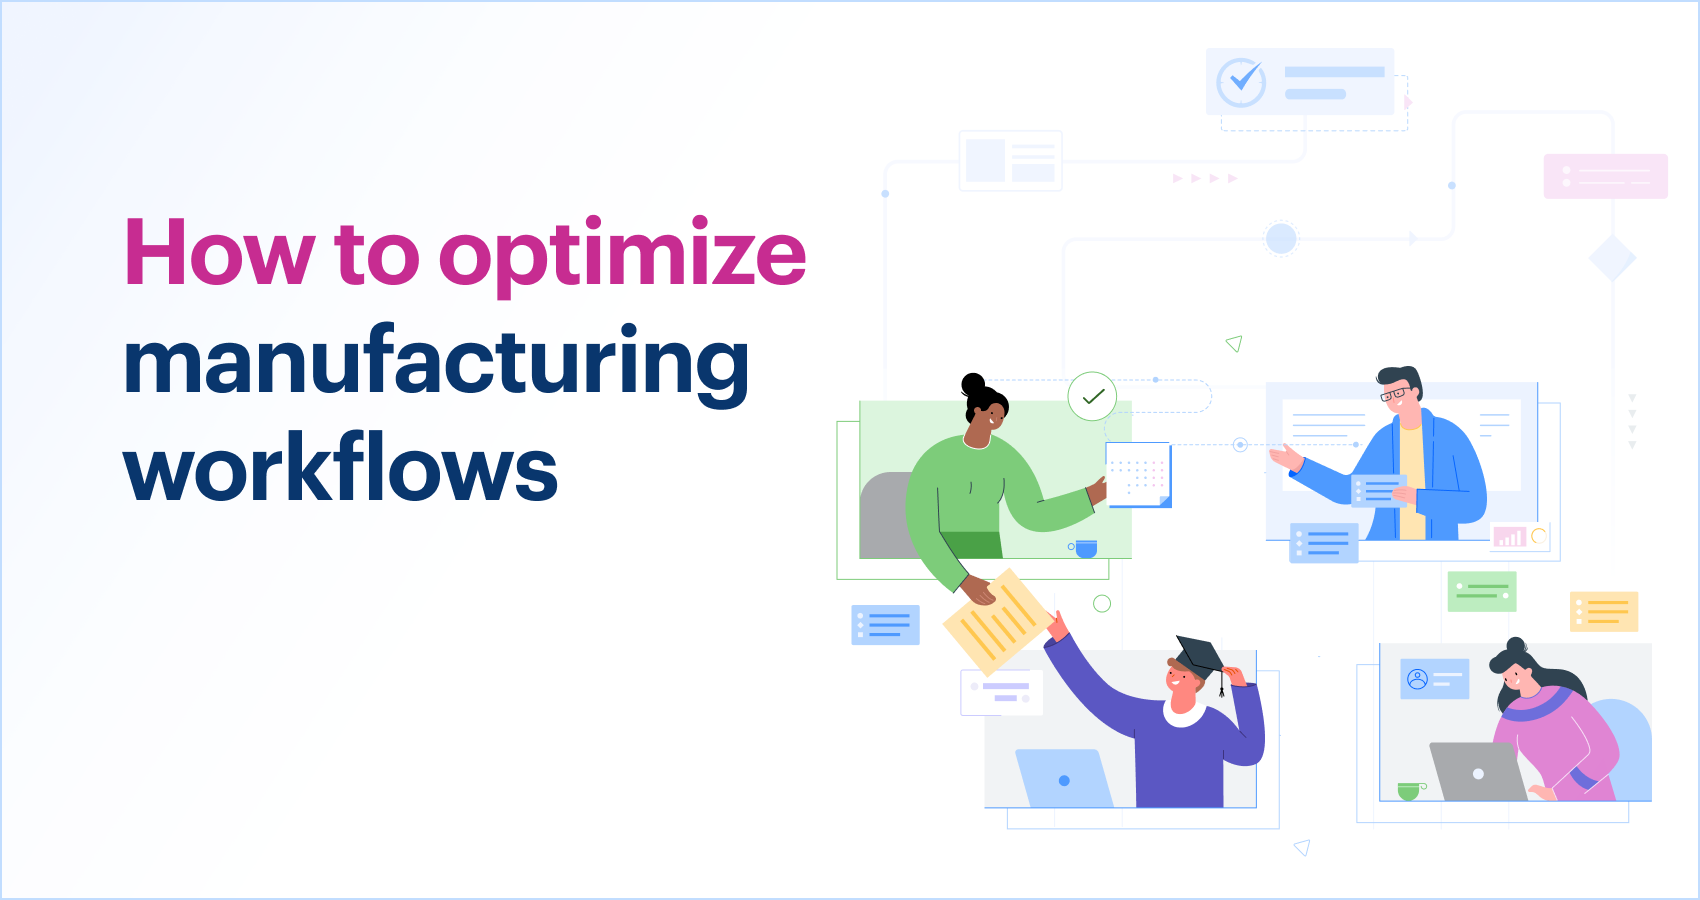 How to optimize manufacturing workflows